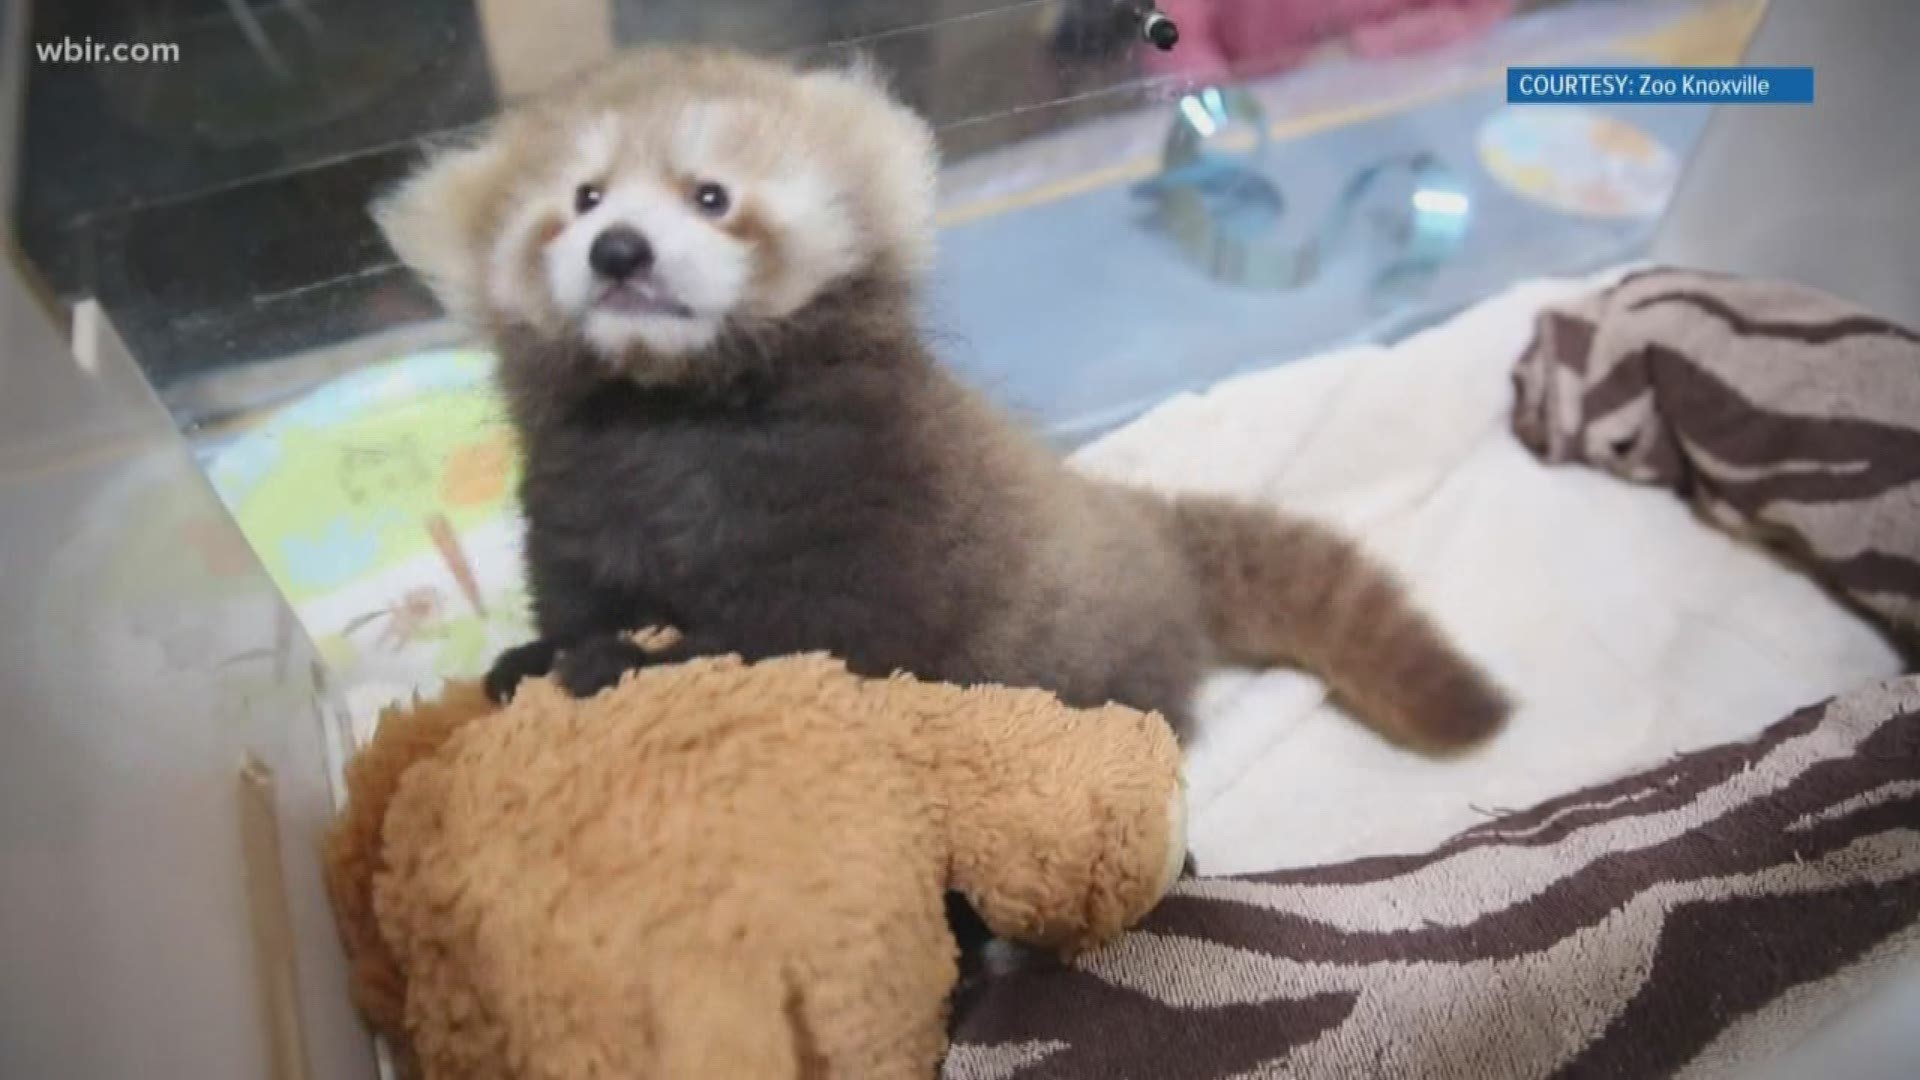 Marvin the adorable red panda cub traveled across the country on Friday from the Idaho Falls Zoo to Zoo Knoxville.